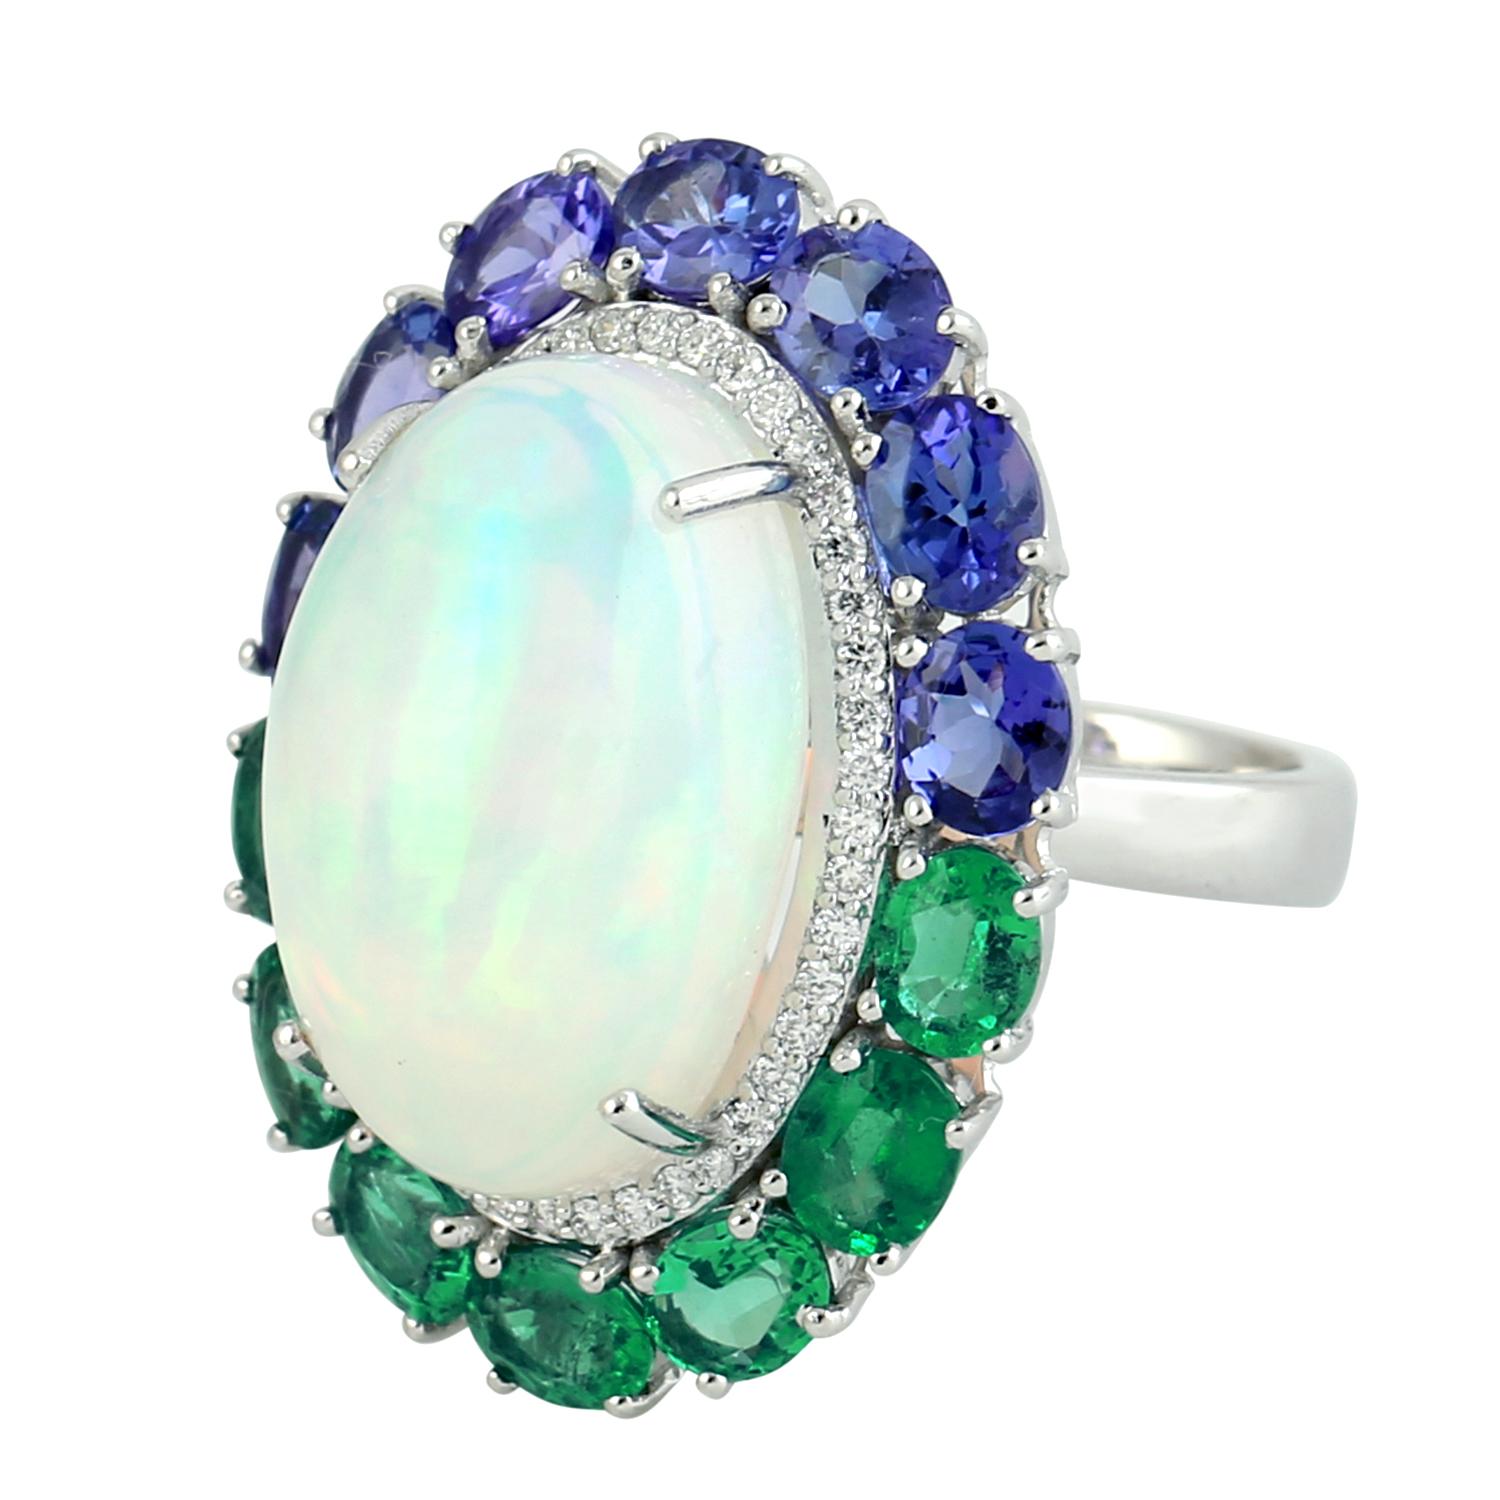 Contemporary Opal & Multi Gemstone Ring With Diamonds Made In 18k White Gold For Sale